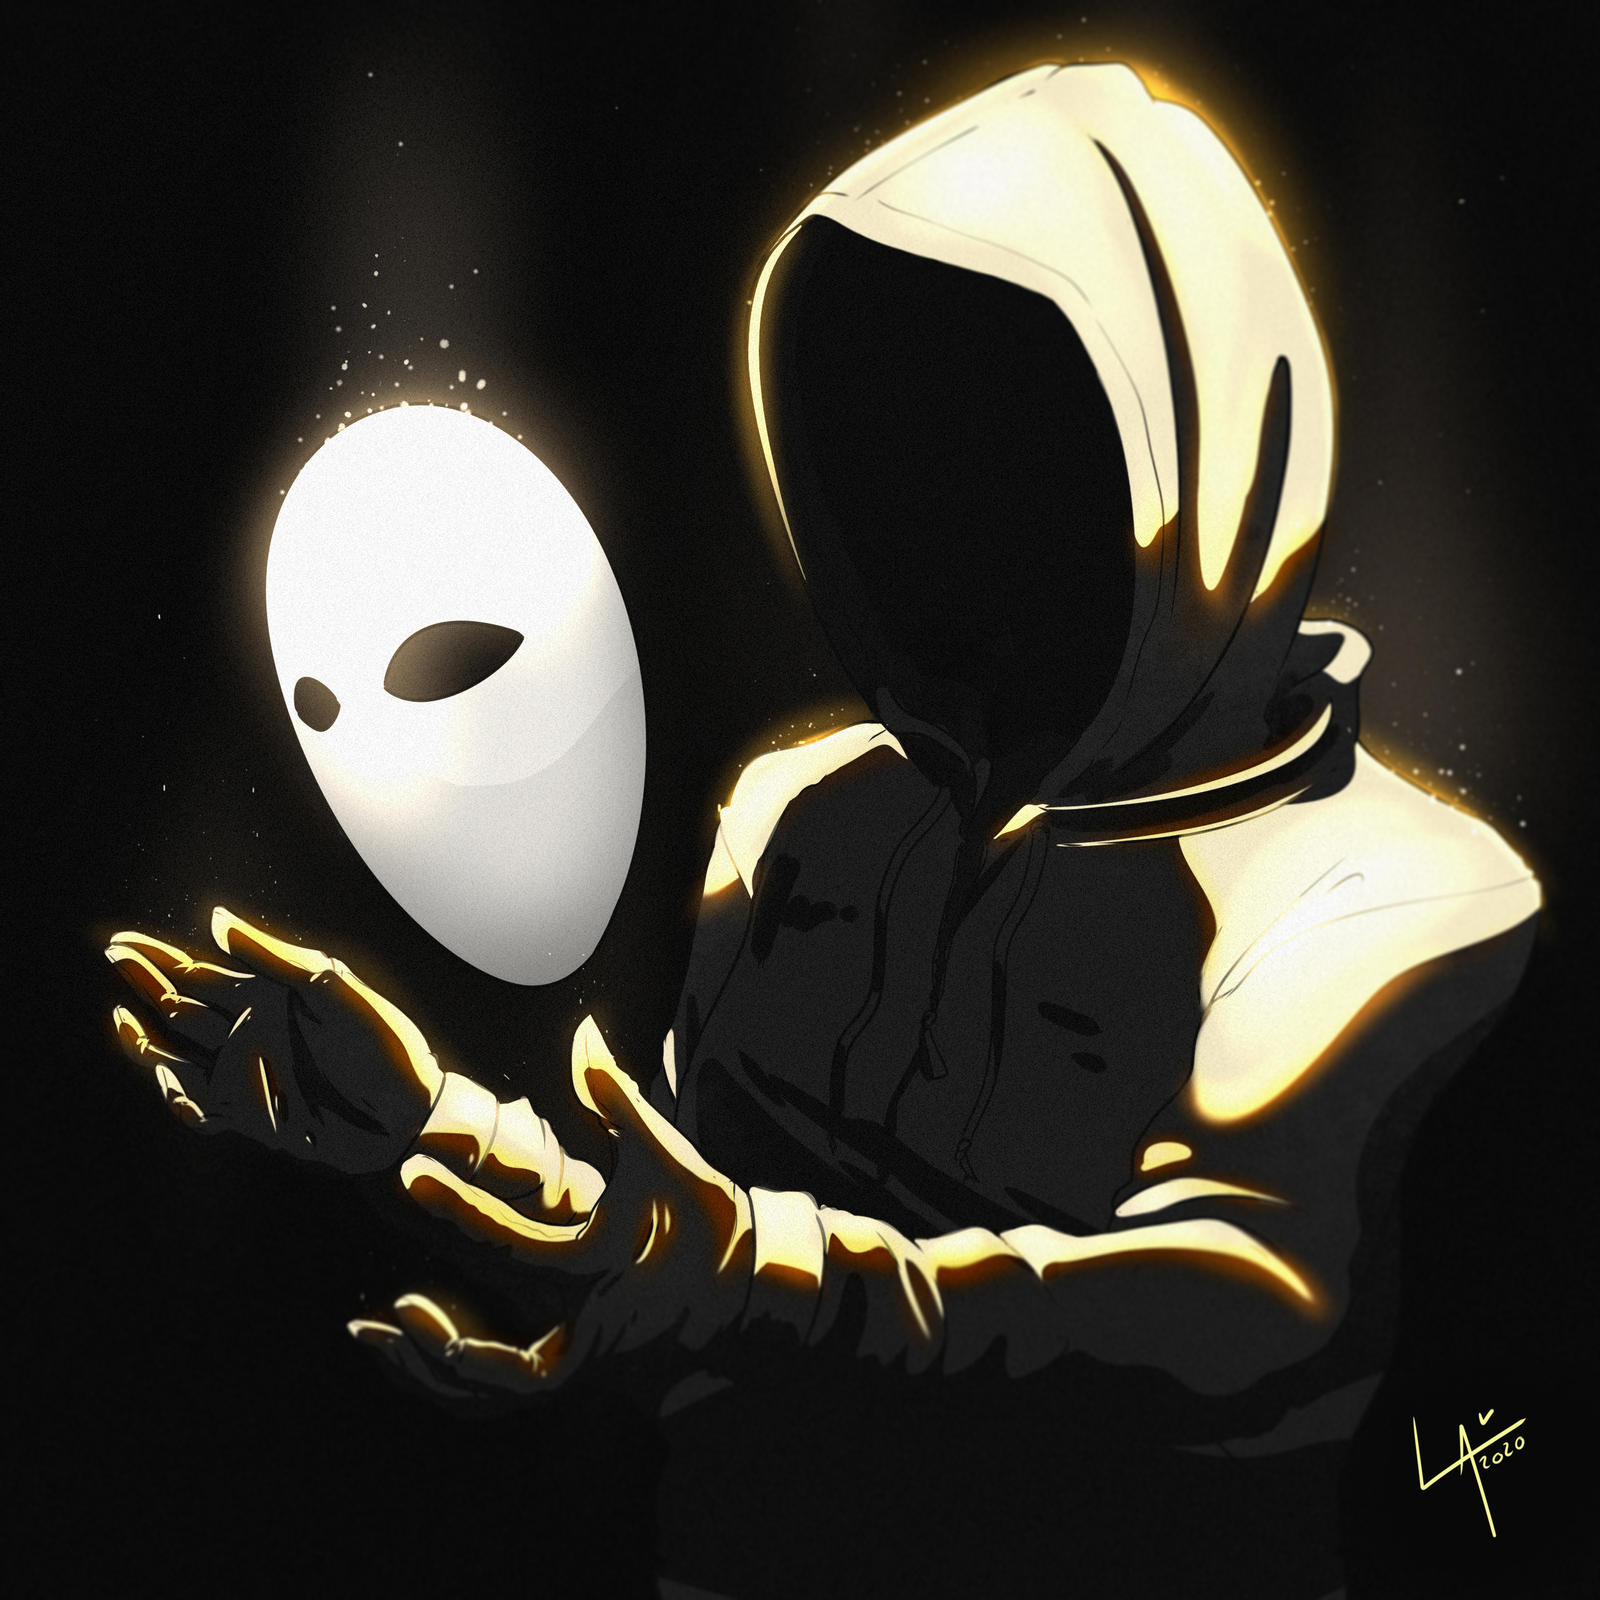 Very few projects are created truly anonymously. I believe the Bitcoin creator h | Hacker News